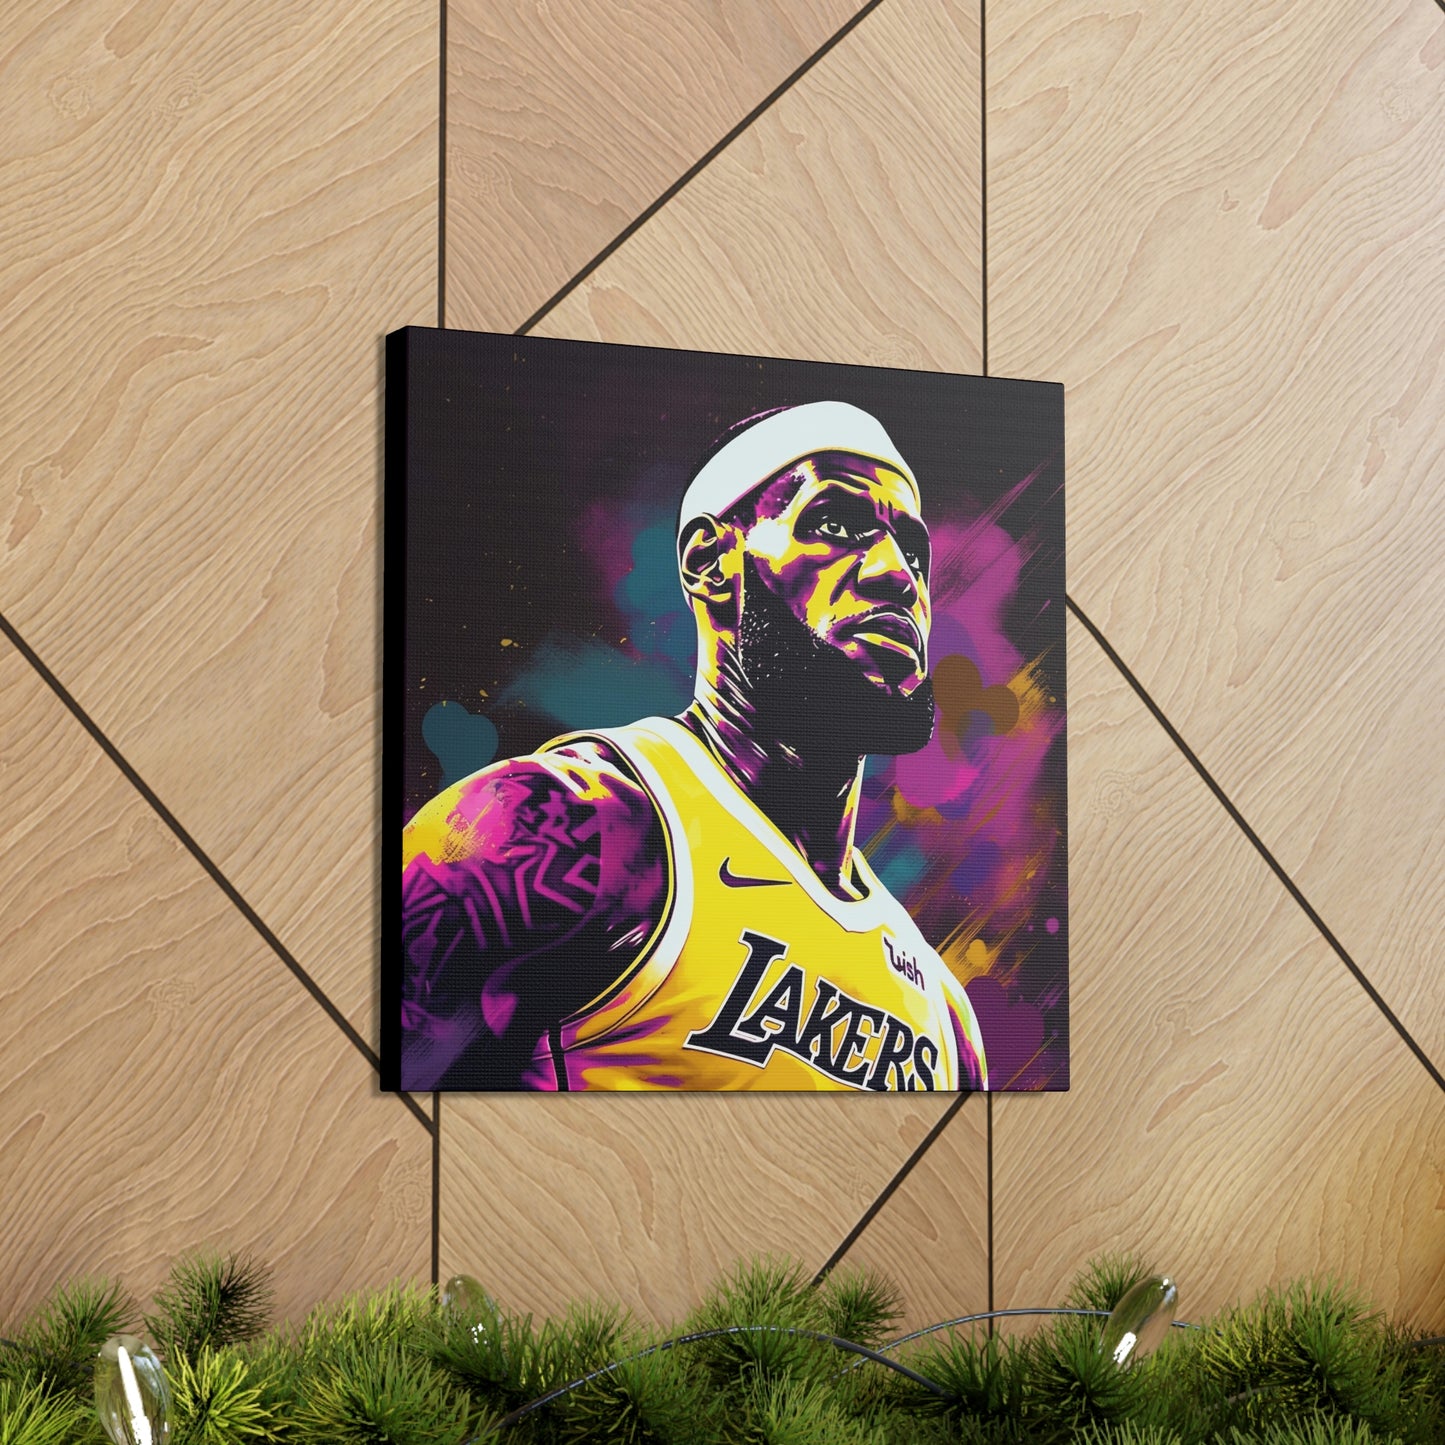 King Lebron and the Power